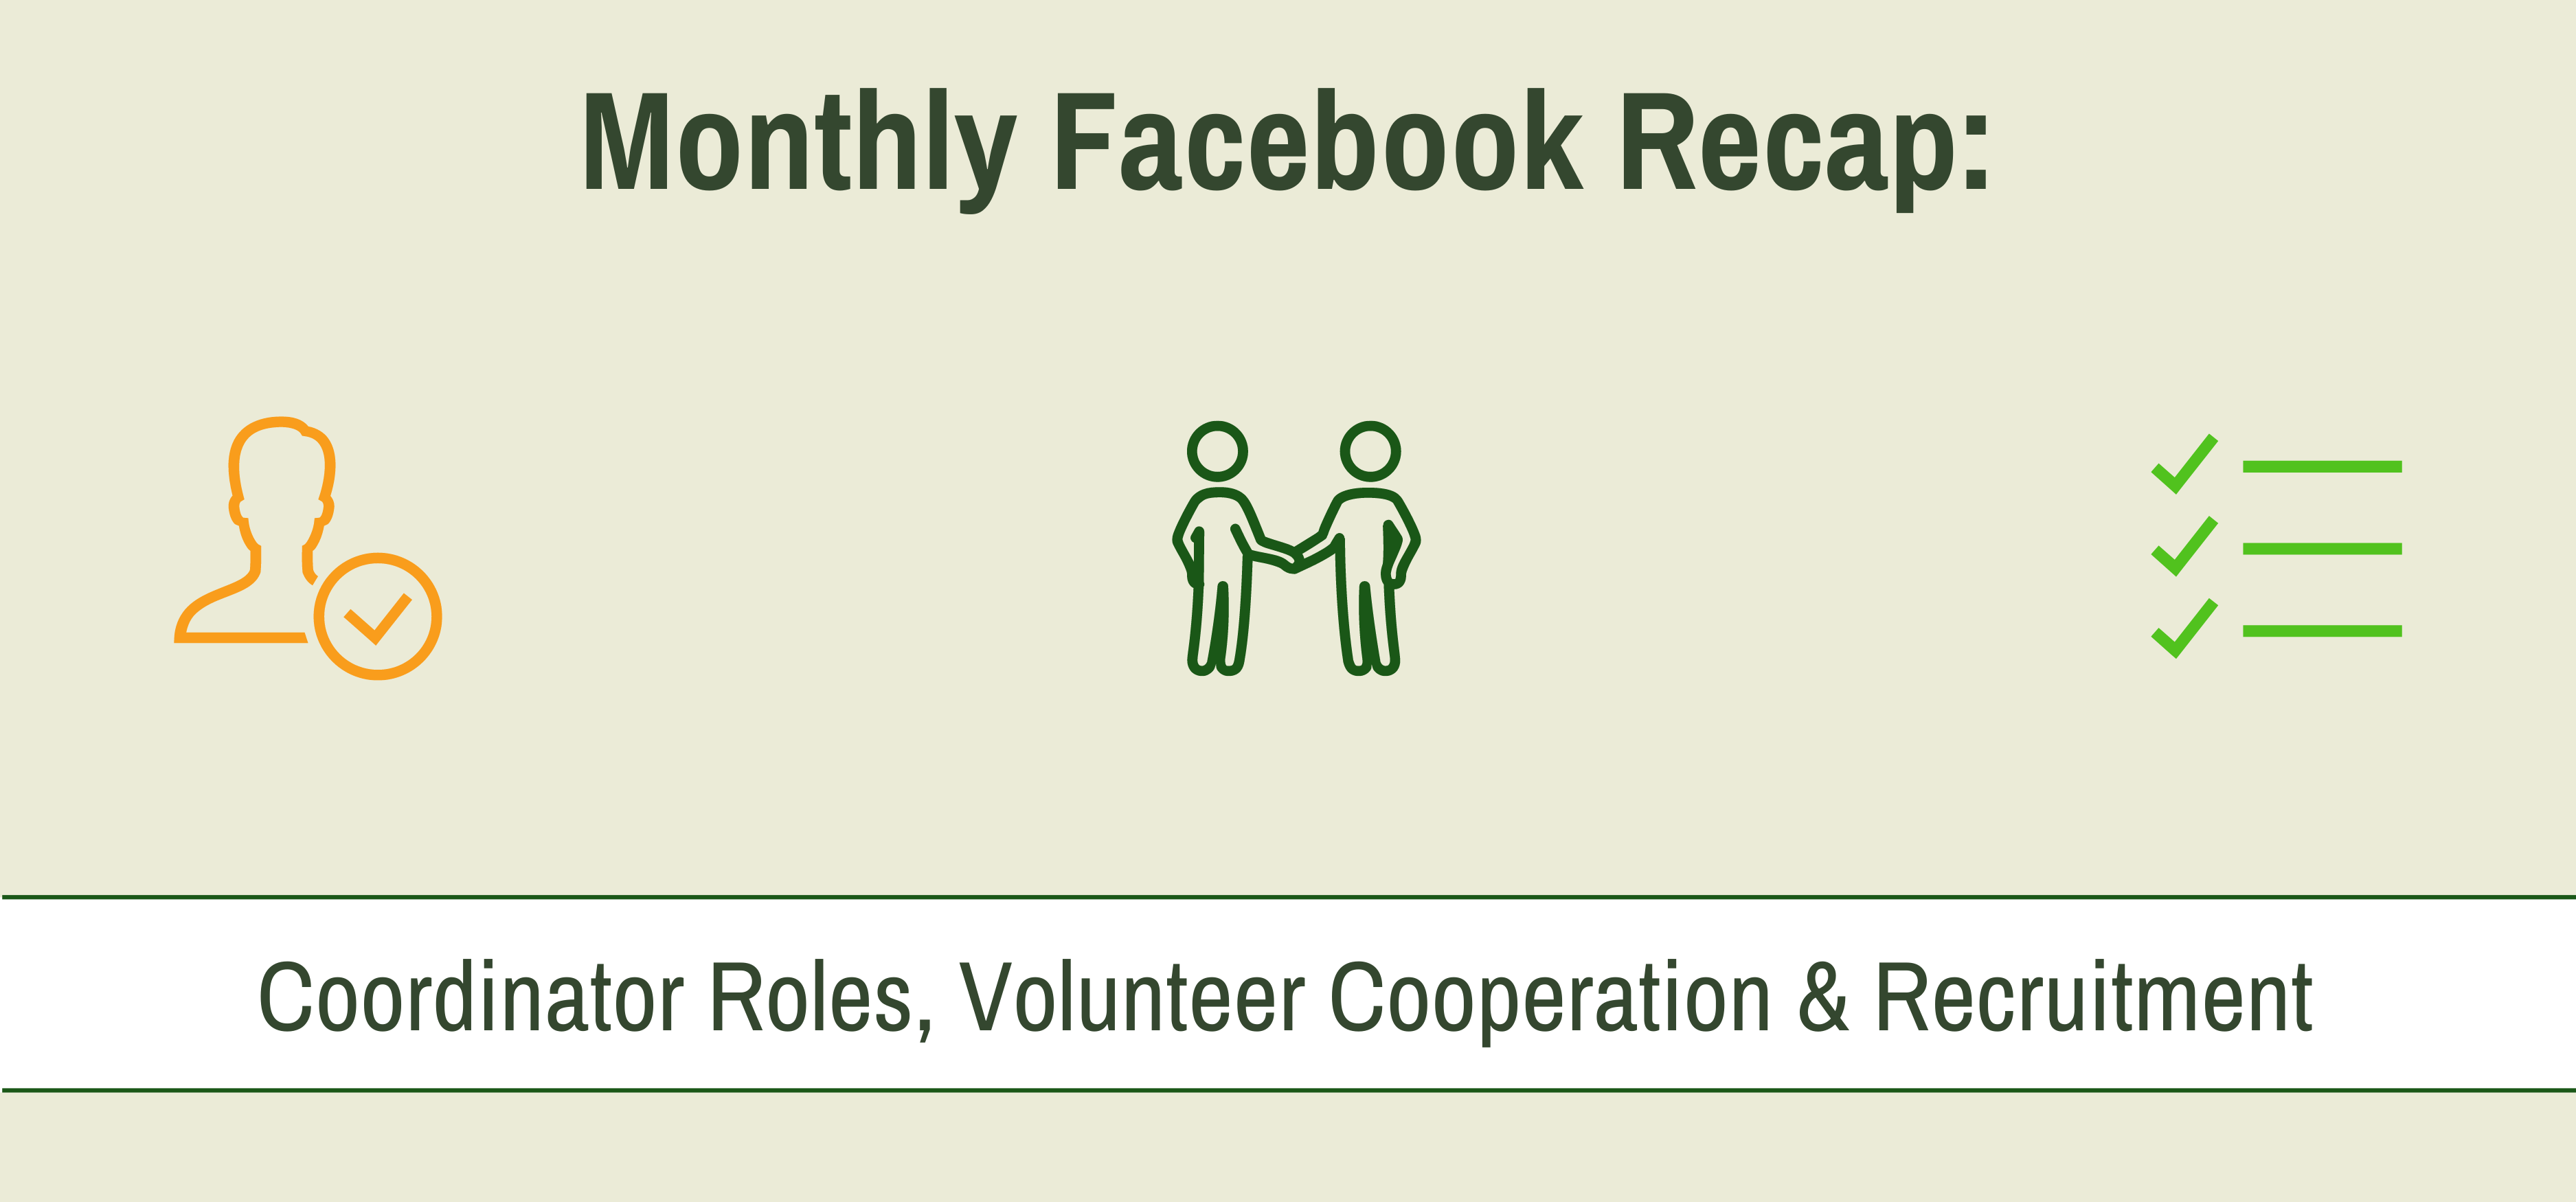 October Monthly Recap graphic with icons depicting coordinators, cooperation, and recruitment.